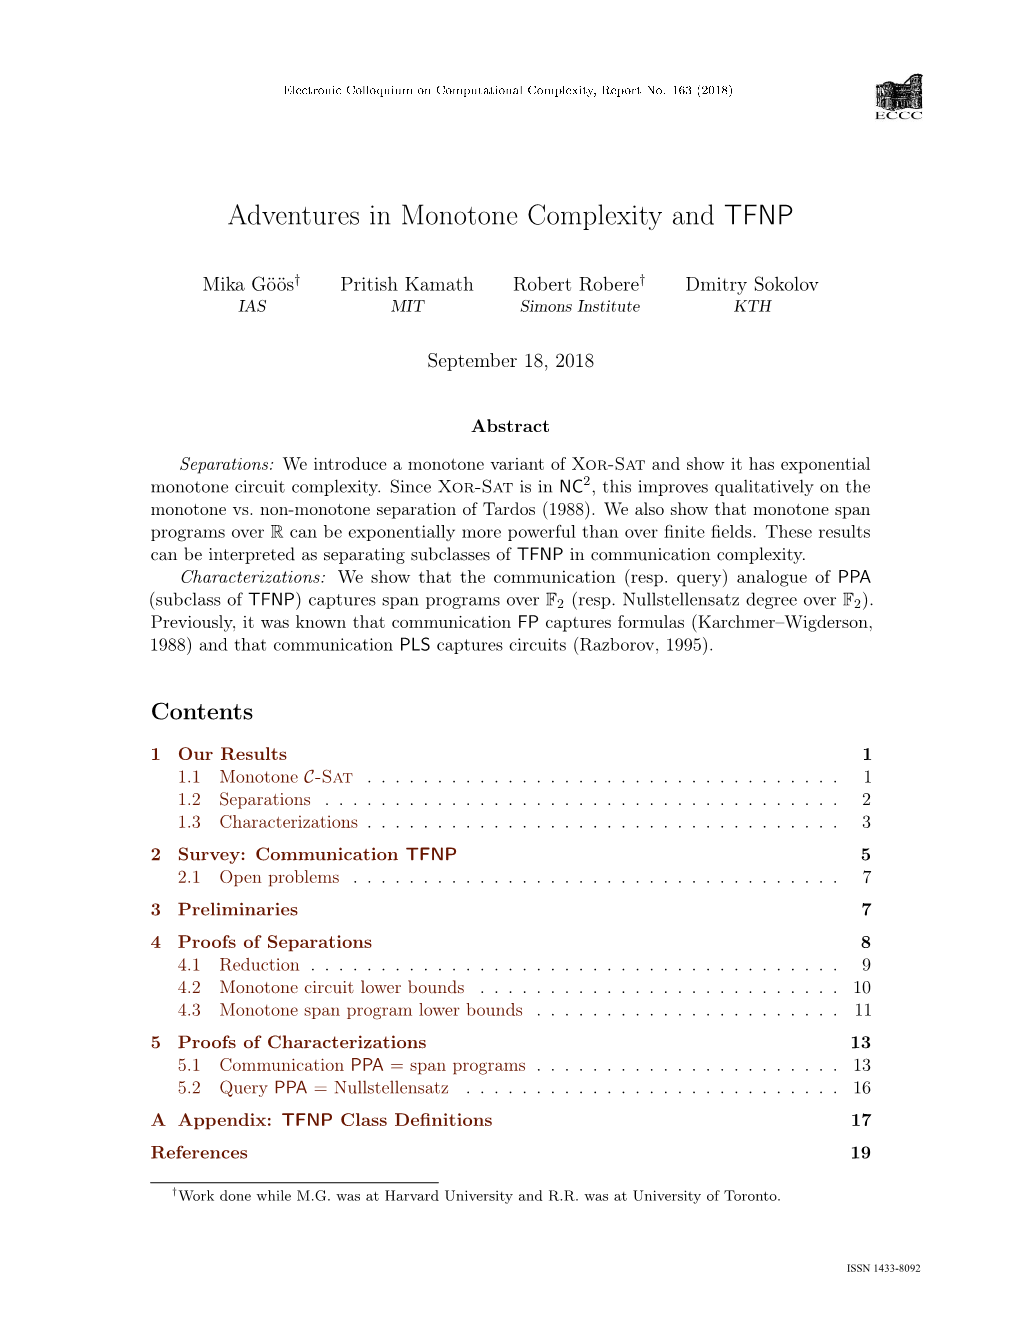 Adventures in Monotone Complexity and TFNP